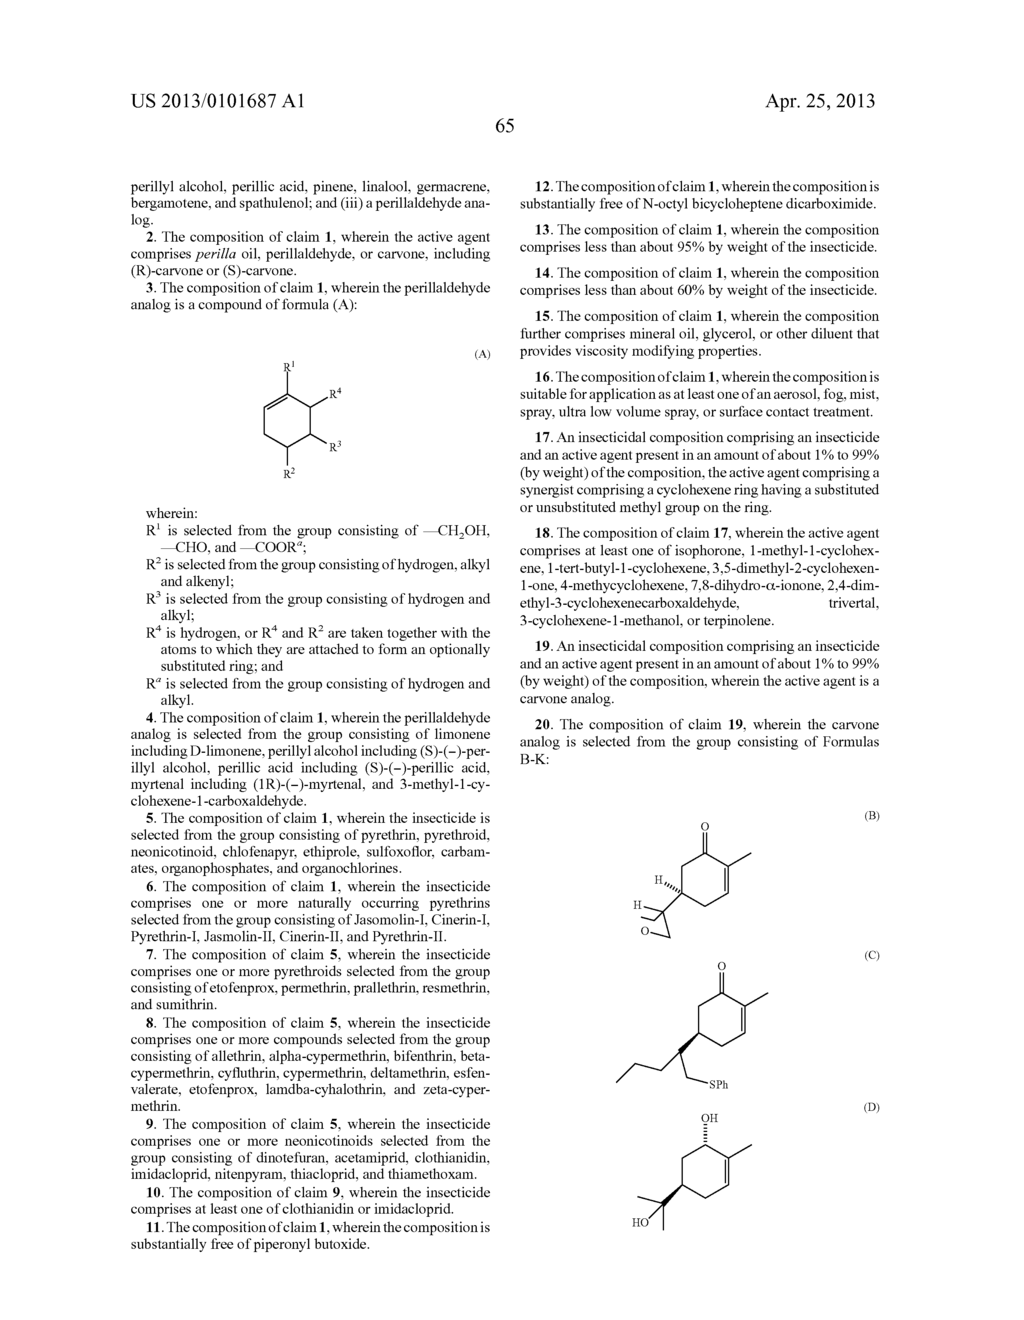 INSECTICIDAL COMPOSITIONS AND METHODS OF USING THE SAME - diagram, schematic, and image 68